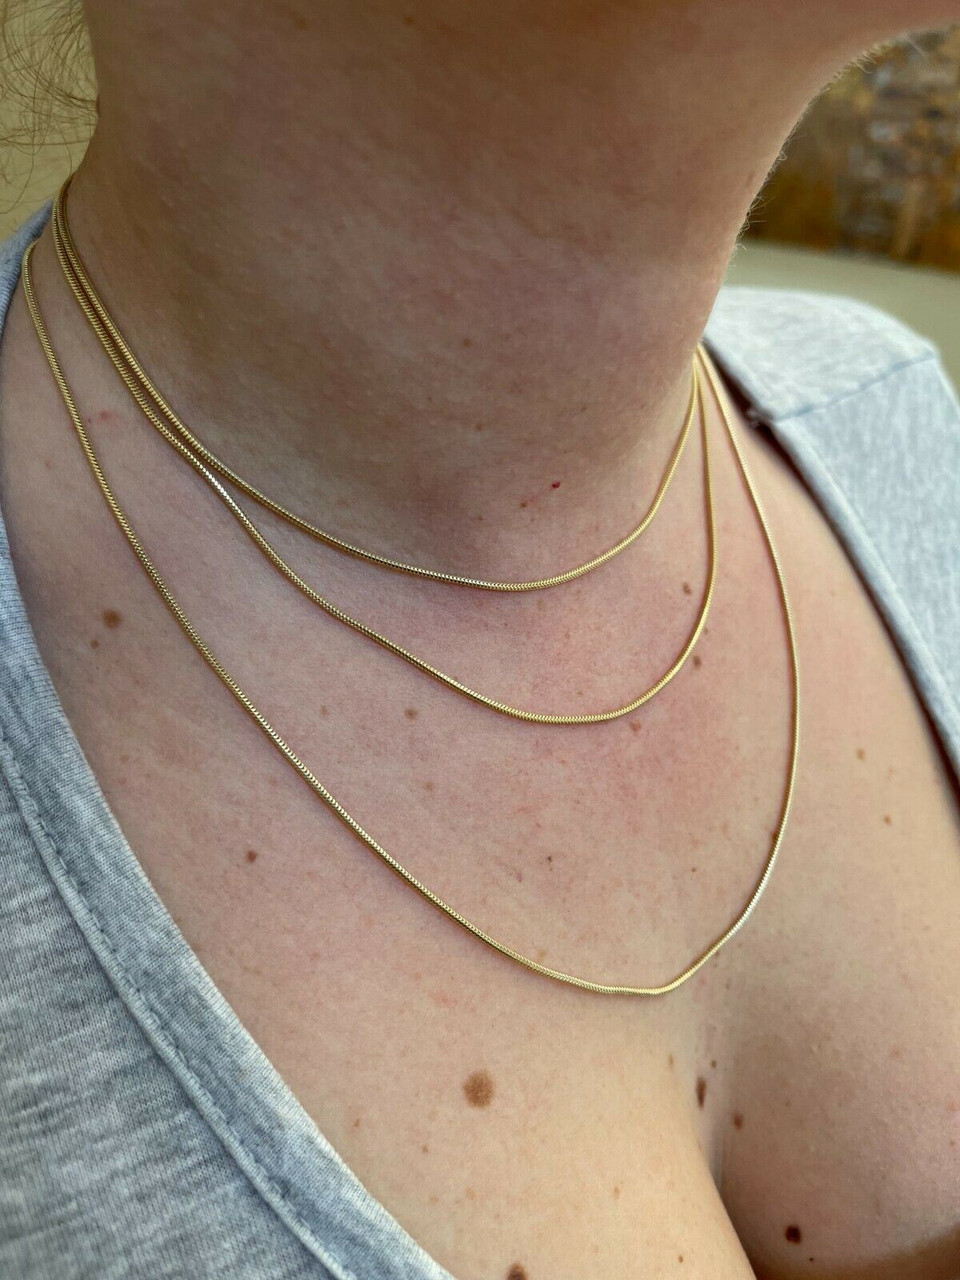 VINTAGE GOLD TONE THICK SNAKE CHAIN NECKLACE | Shop necklaces, Chain  necklace, Snake chain